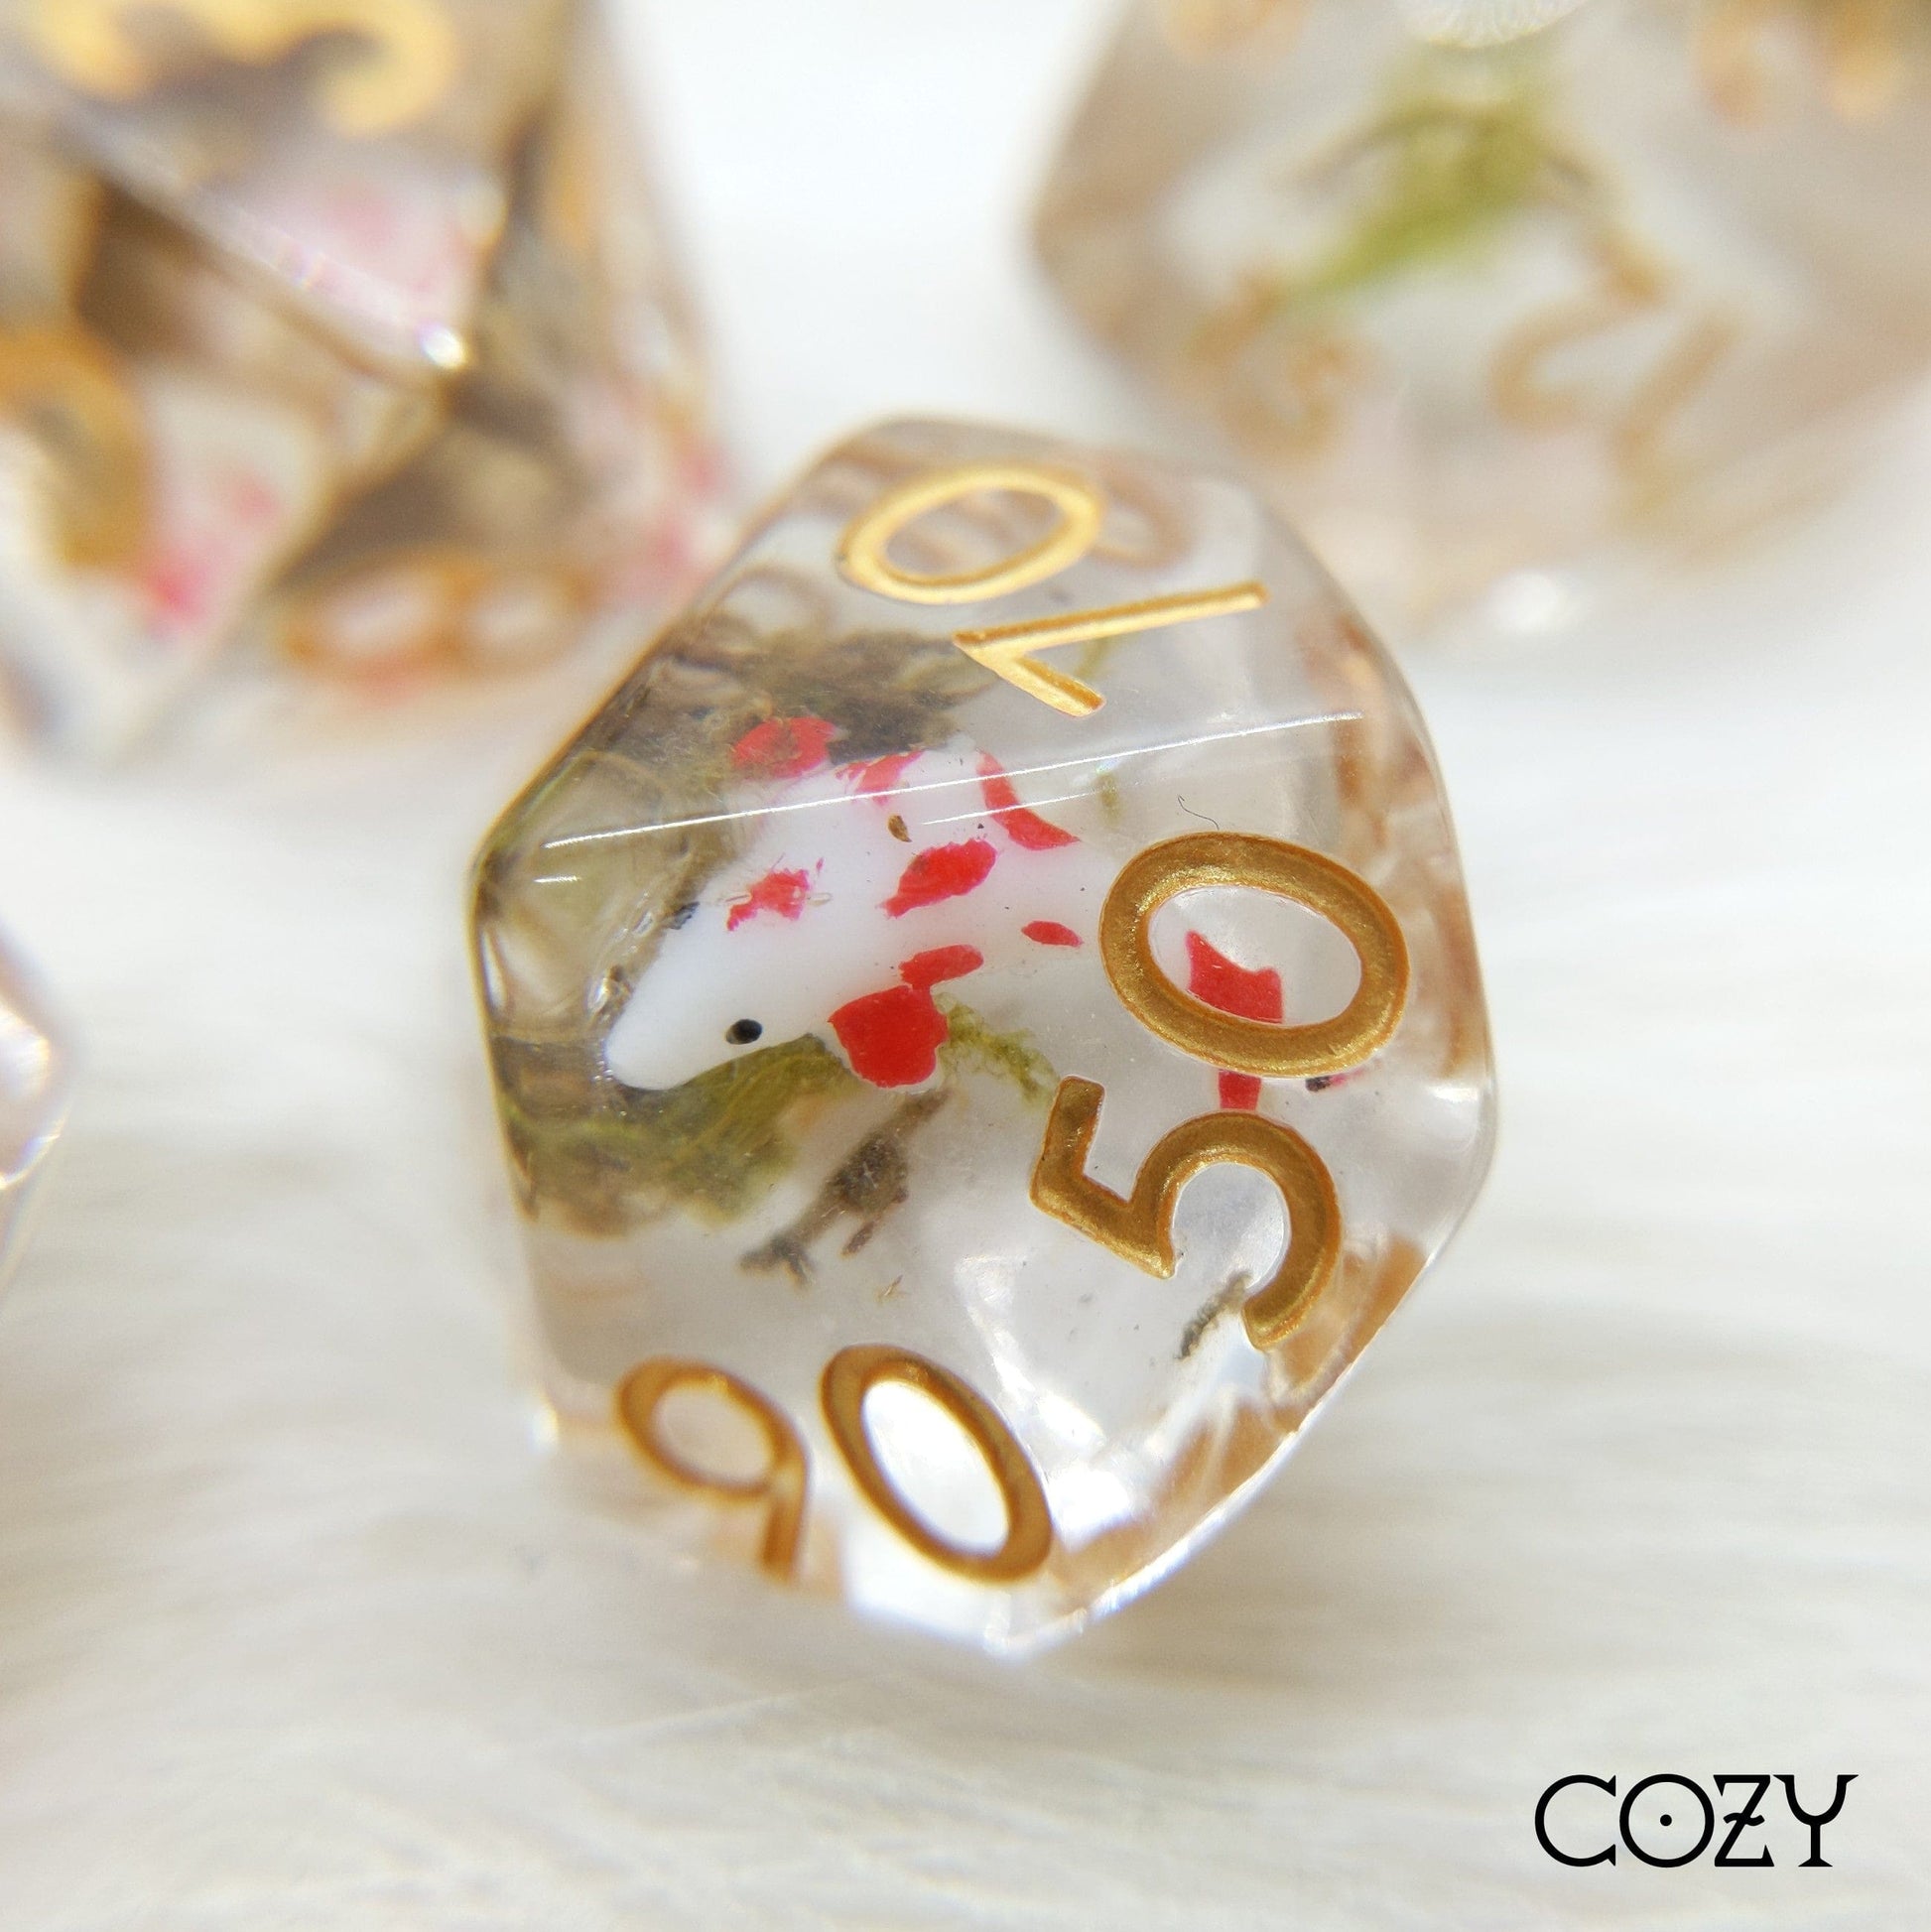 Koi Fish and Moss Dice Set. Little Fish and Dried Moss DND dice set